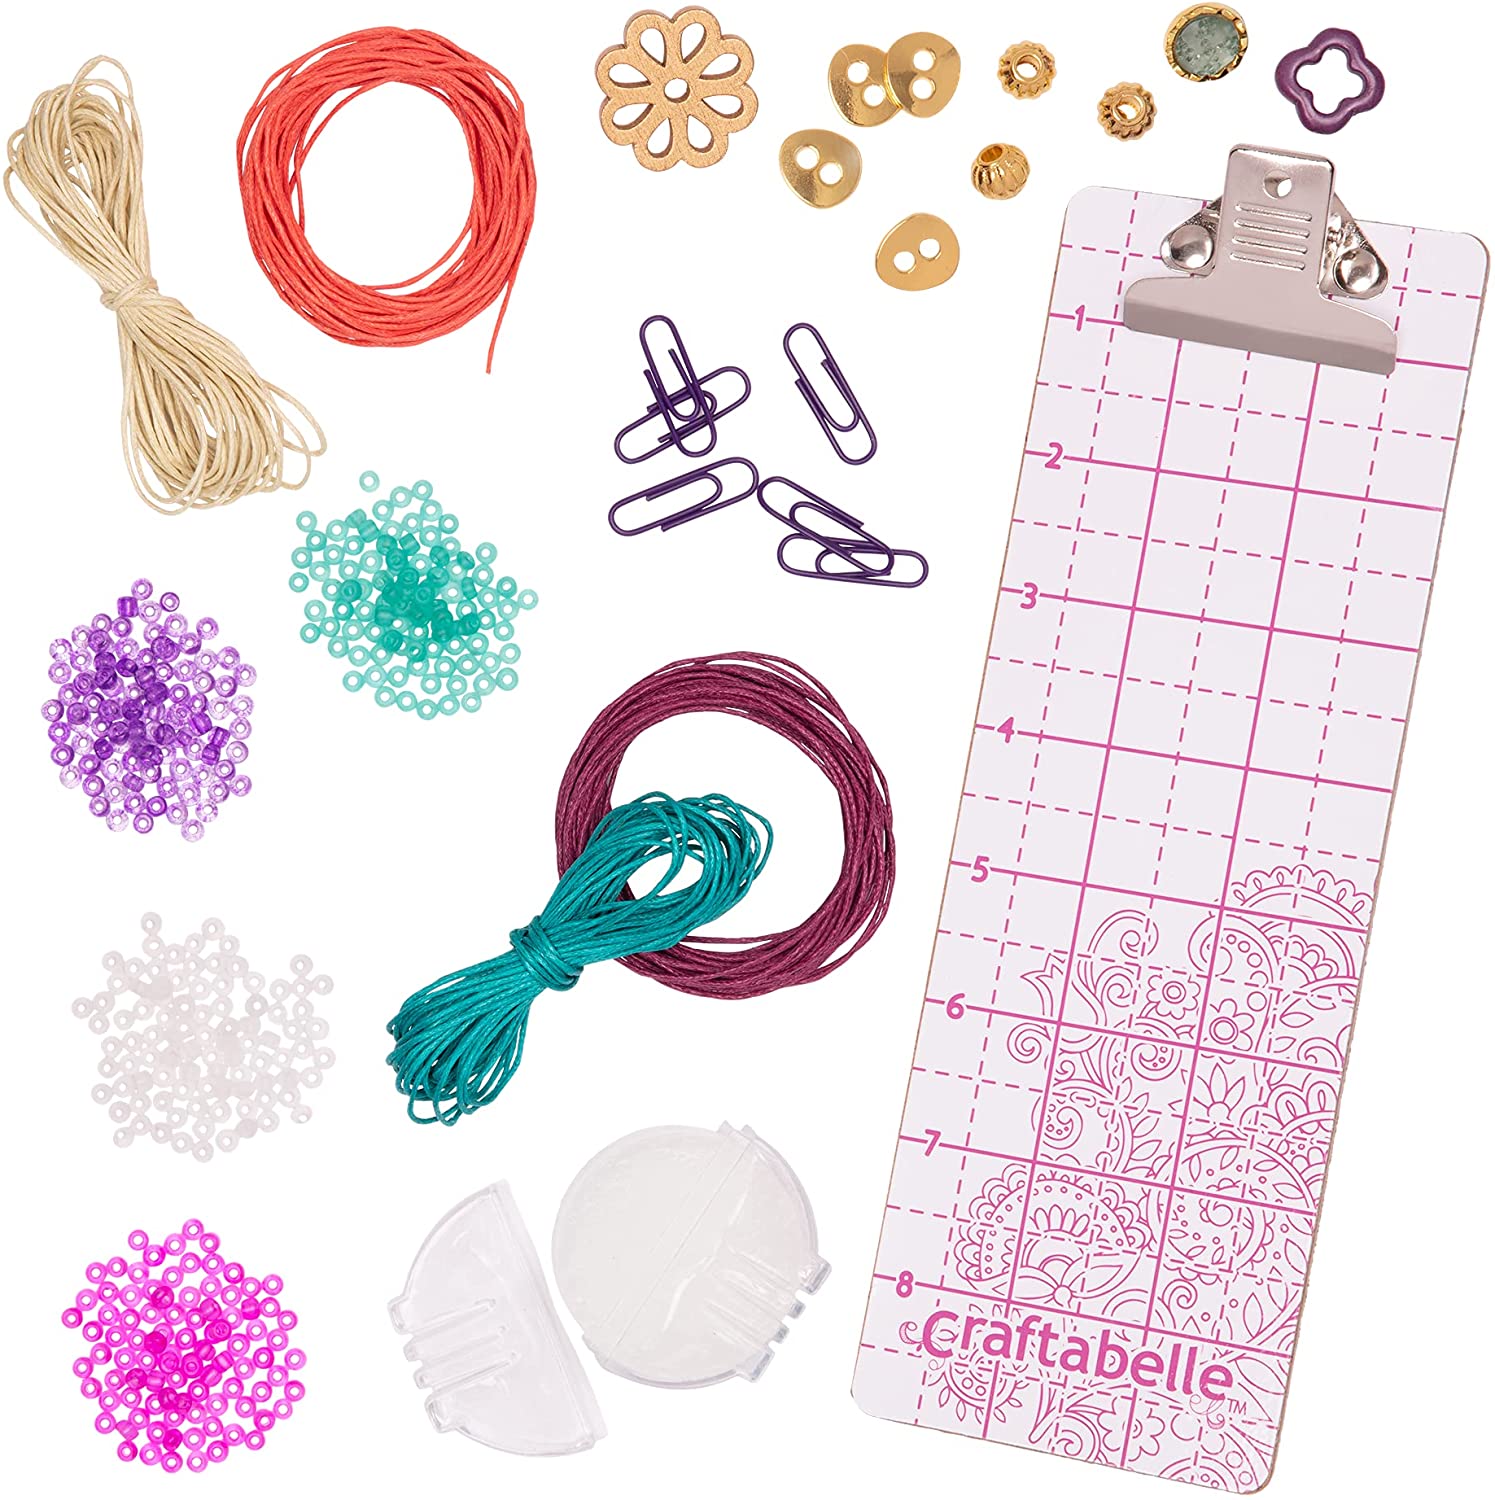 Bracelet-Making Kit Craftabelle DIY Jewelry Kits for Kids Aged 8 Years + CF2400C6Z 29pc Jewelry Set with Beads and Leather Cords Natural Charms Creation Kit 